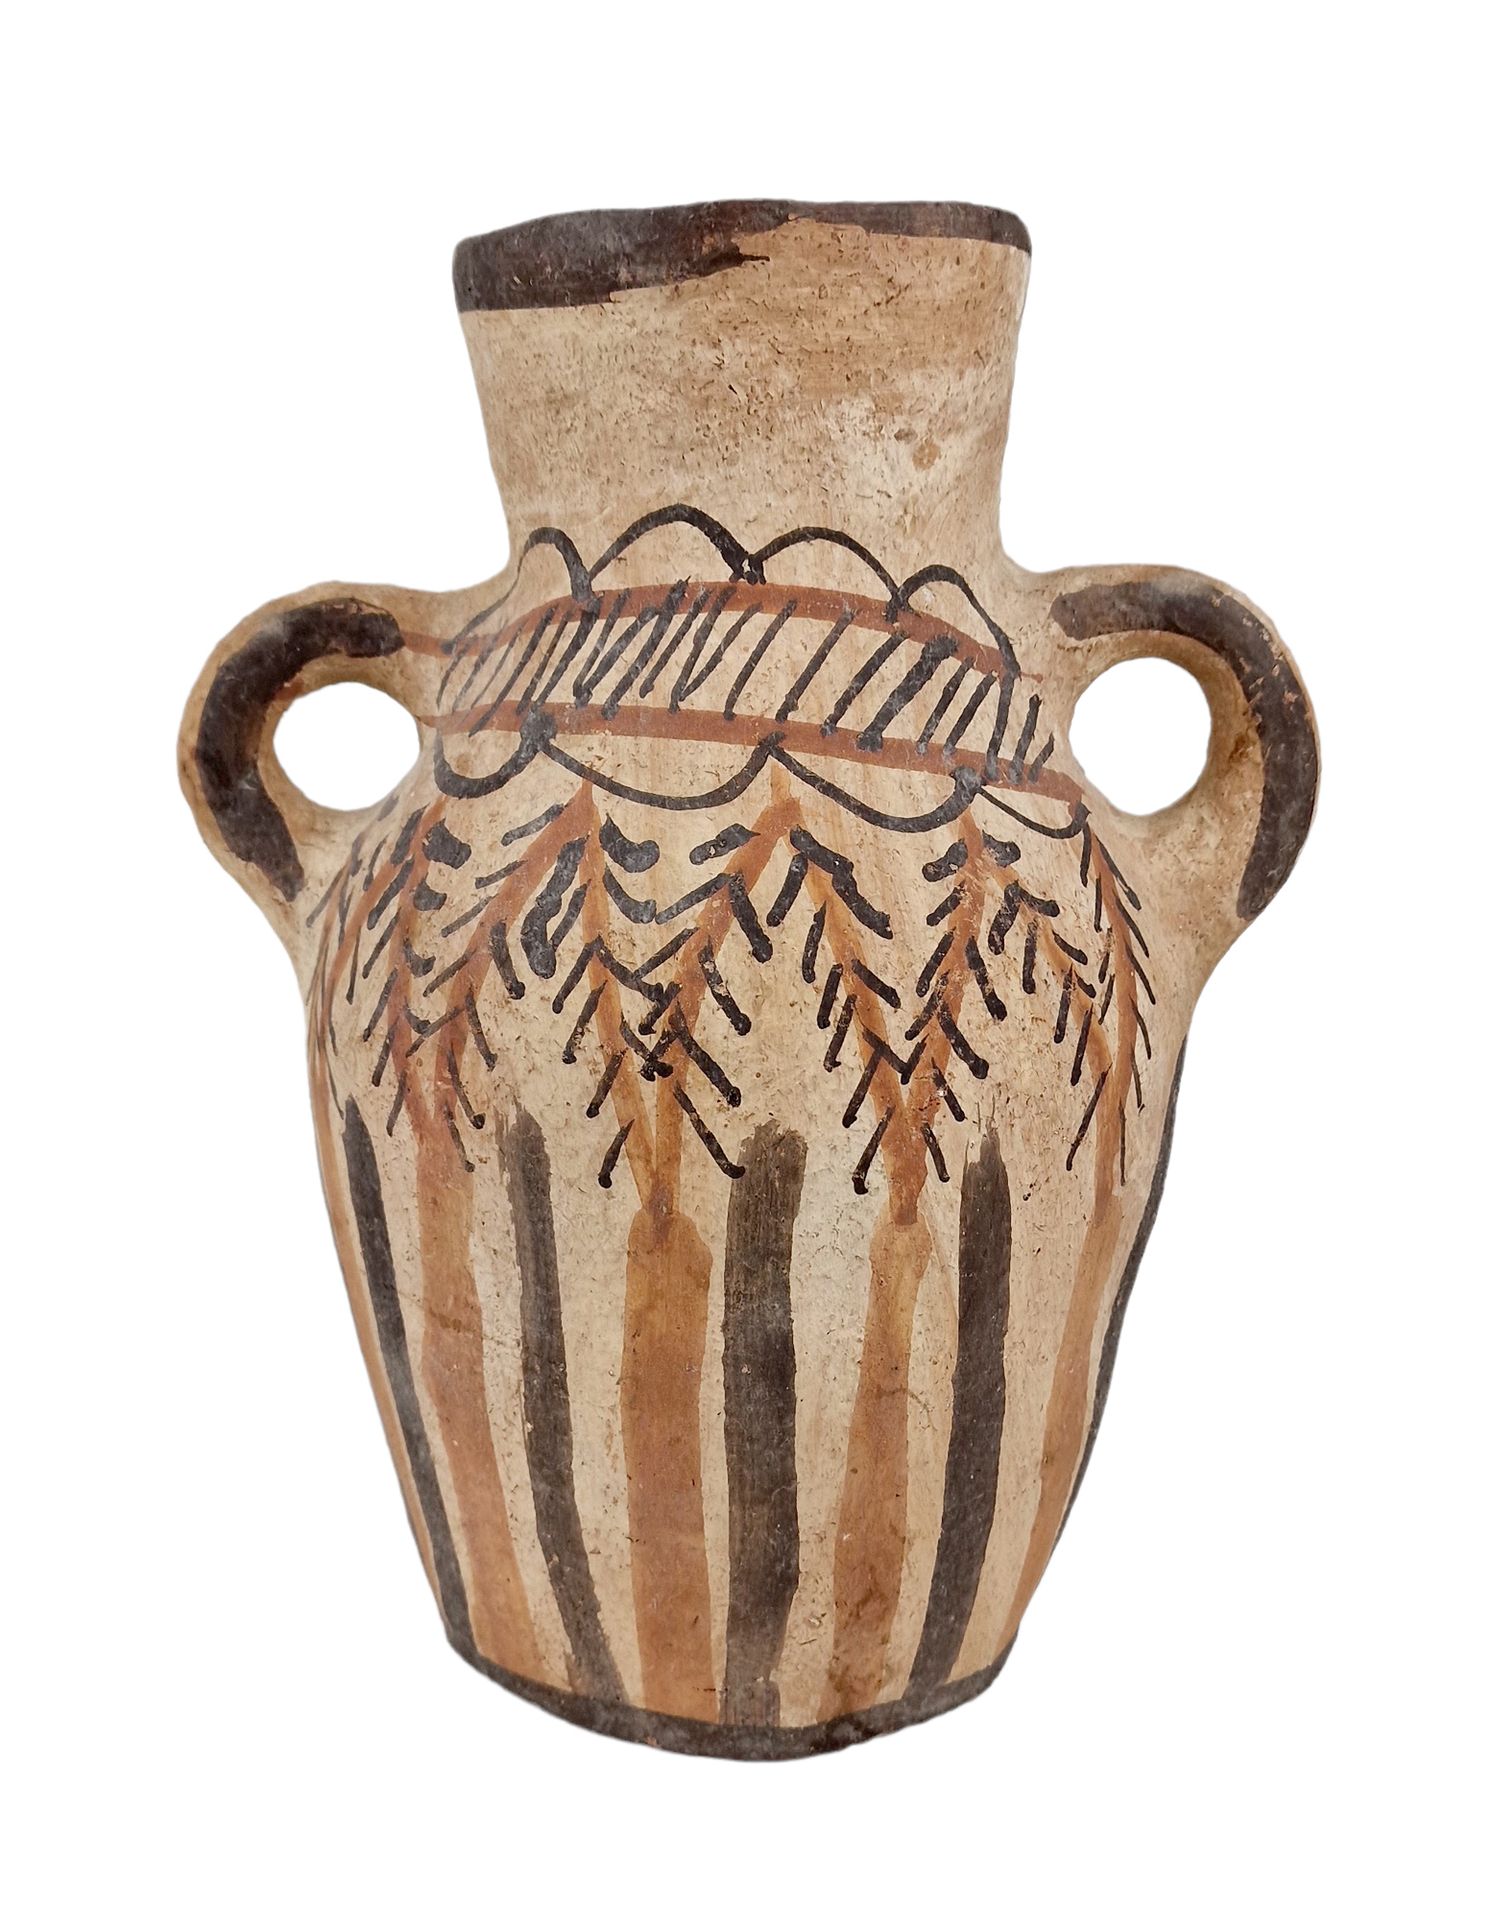 CERAMIQUE FRANCAISE VERS 1950-60 Beautiful amphora



With two handles, in terra&hellip;